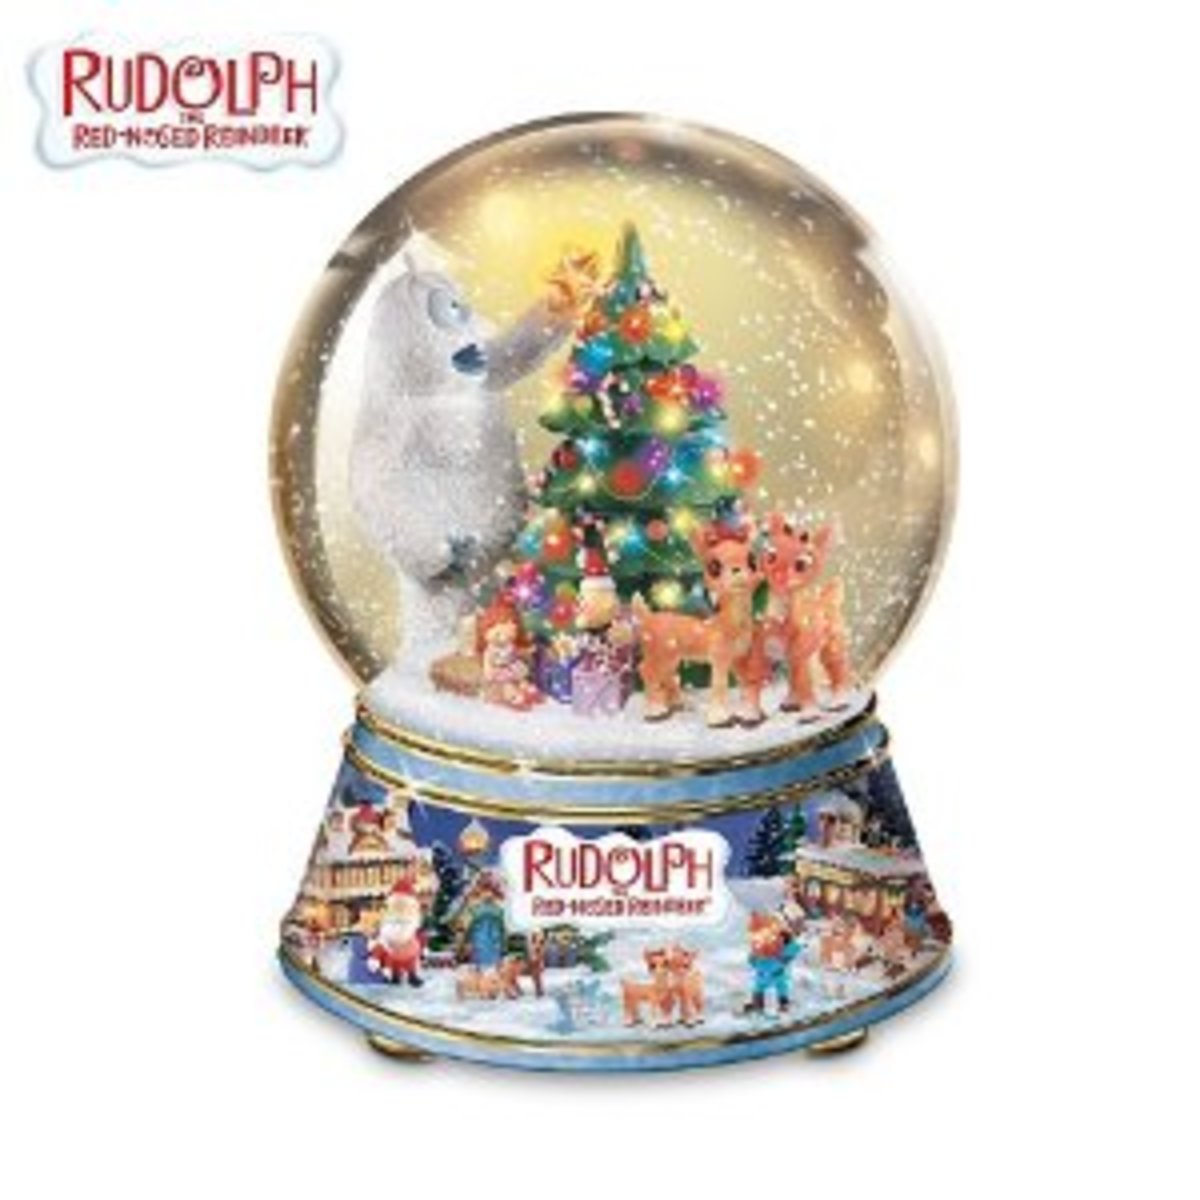 rudolph-the-red-nosed-reindeer-gifts